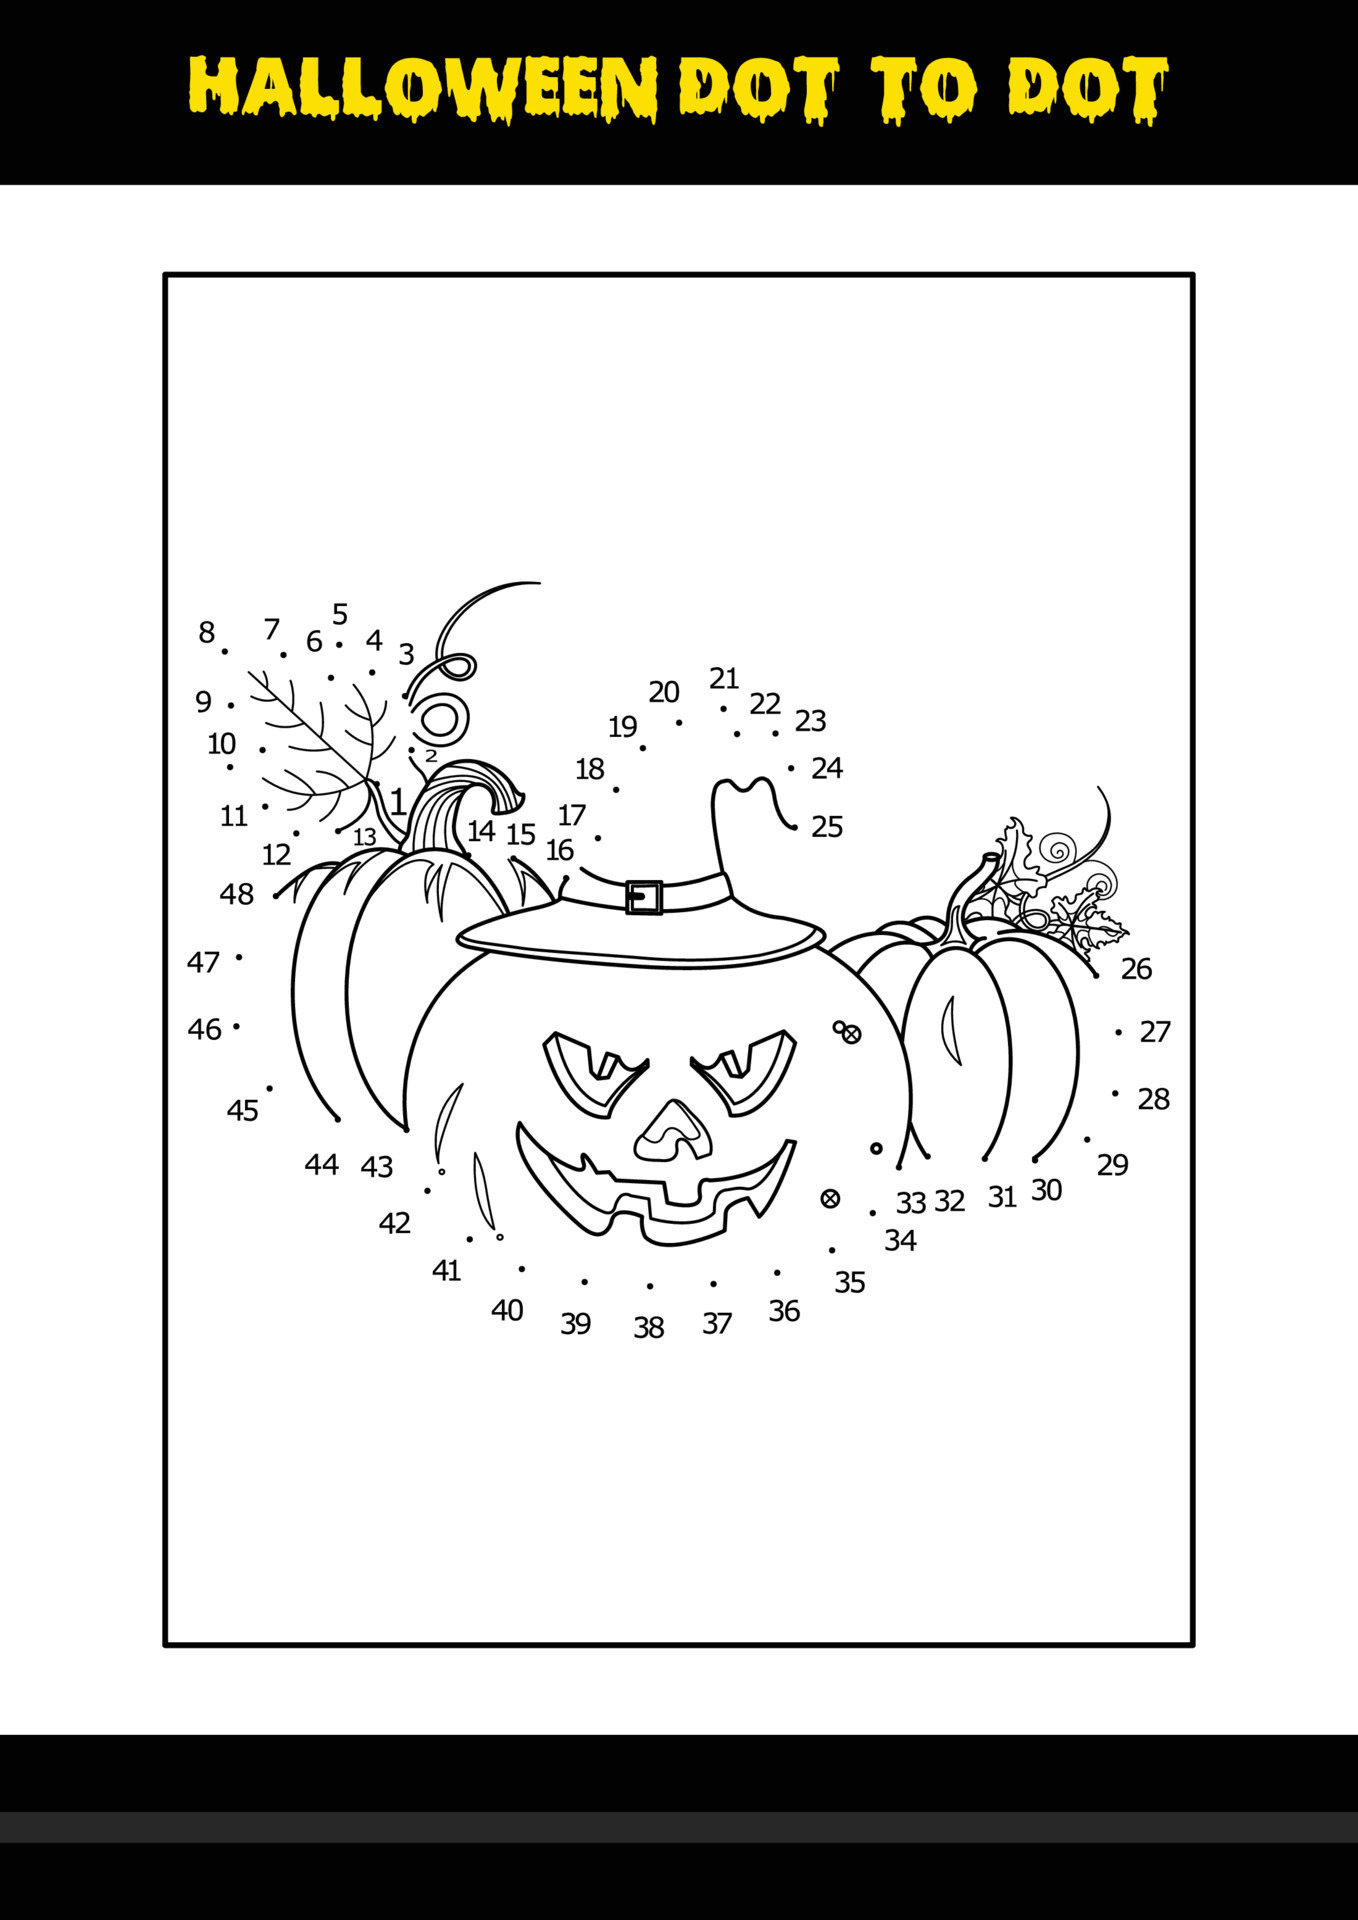 halloween-dot-to-dot-coloring-page-for-kids-line-art-coloring-page-design-for-kids-12393673